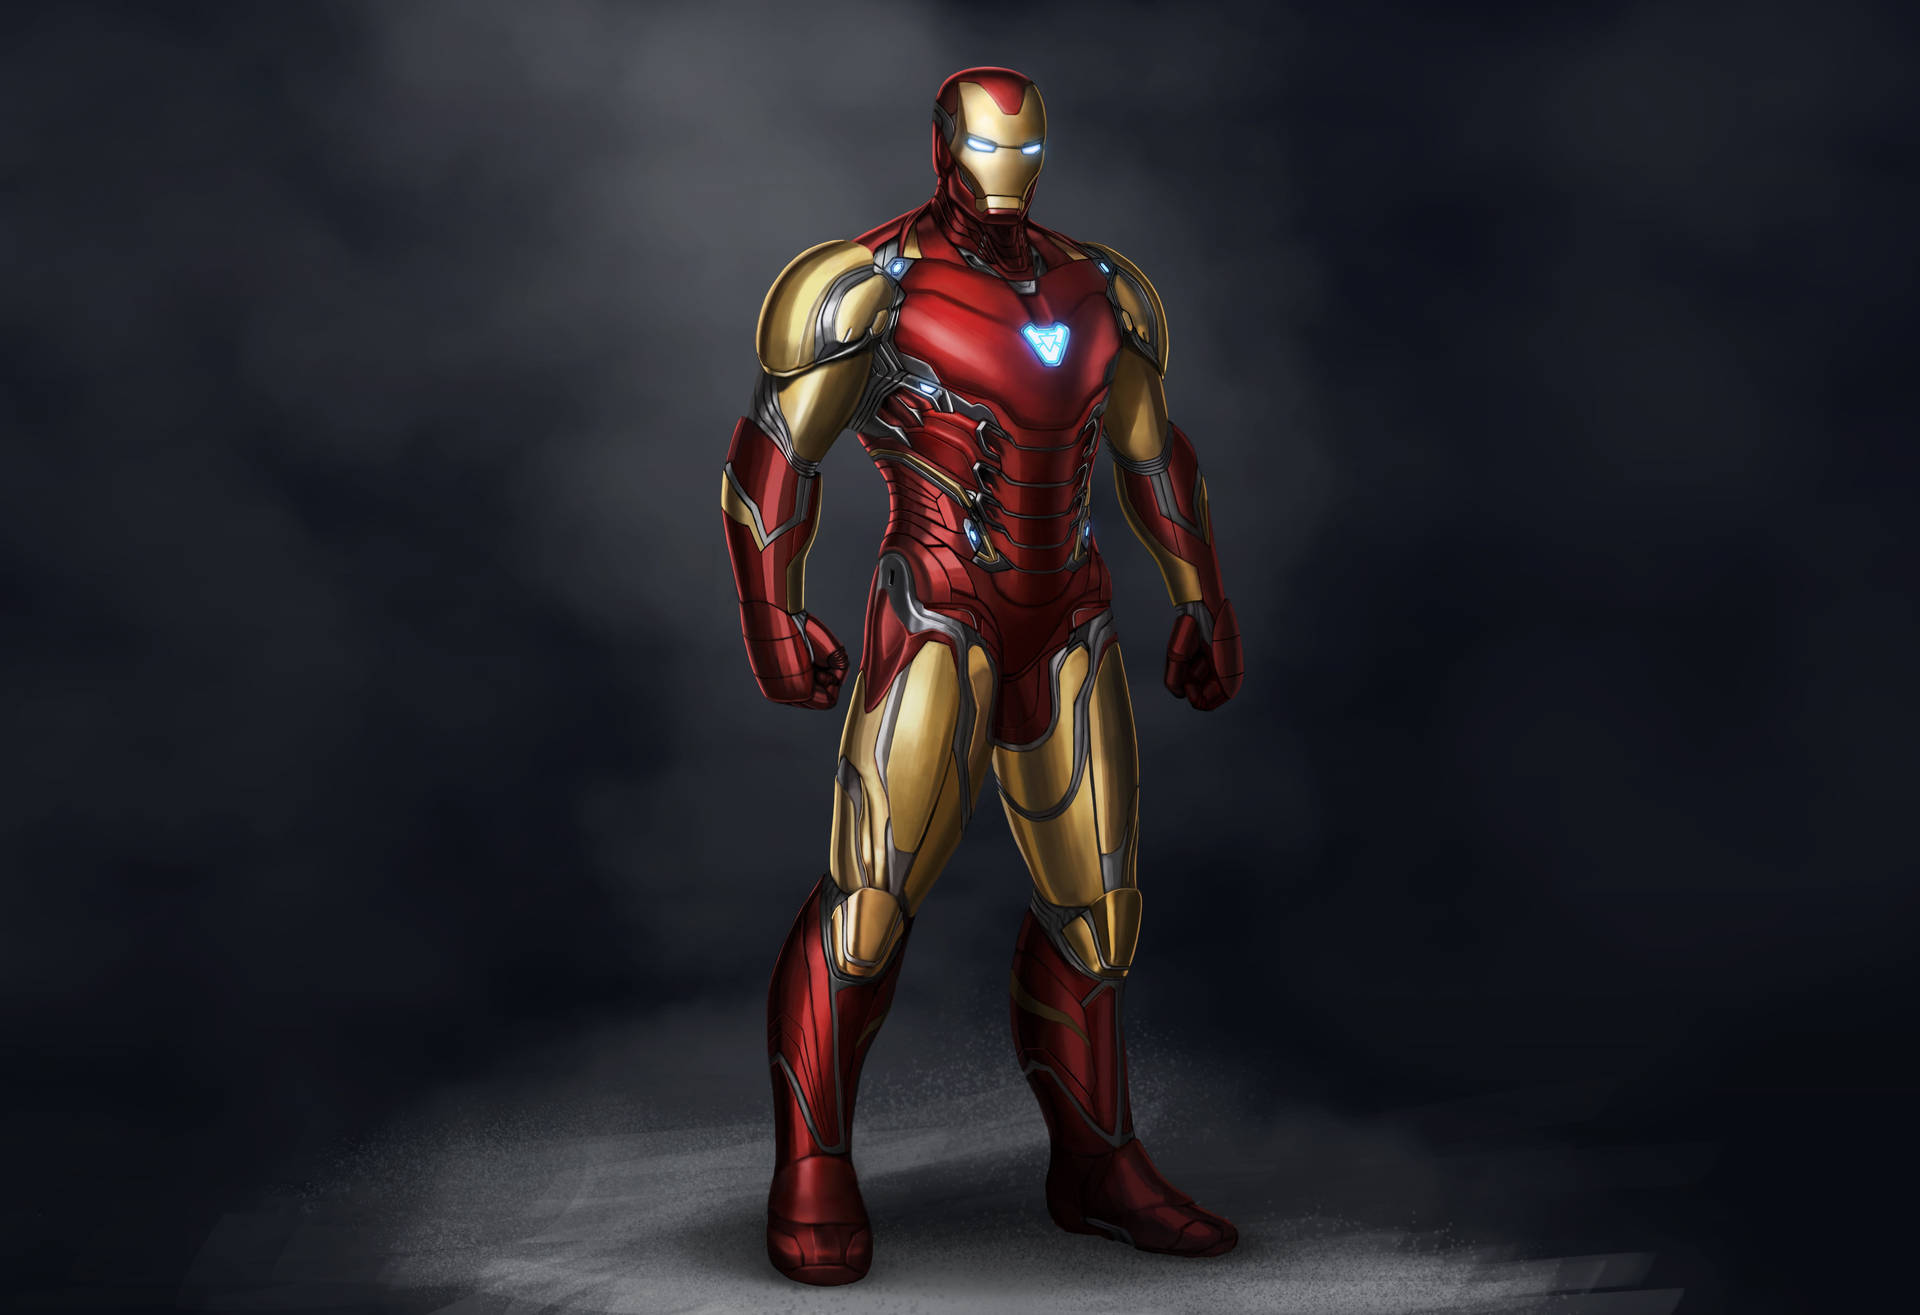 100+] Iron Man Mark 85 Wallpapers For Free | Wallpapers.Com